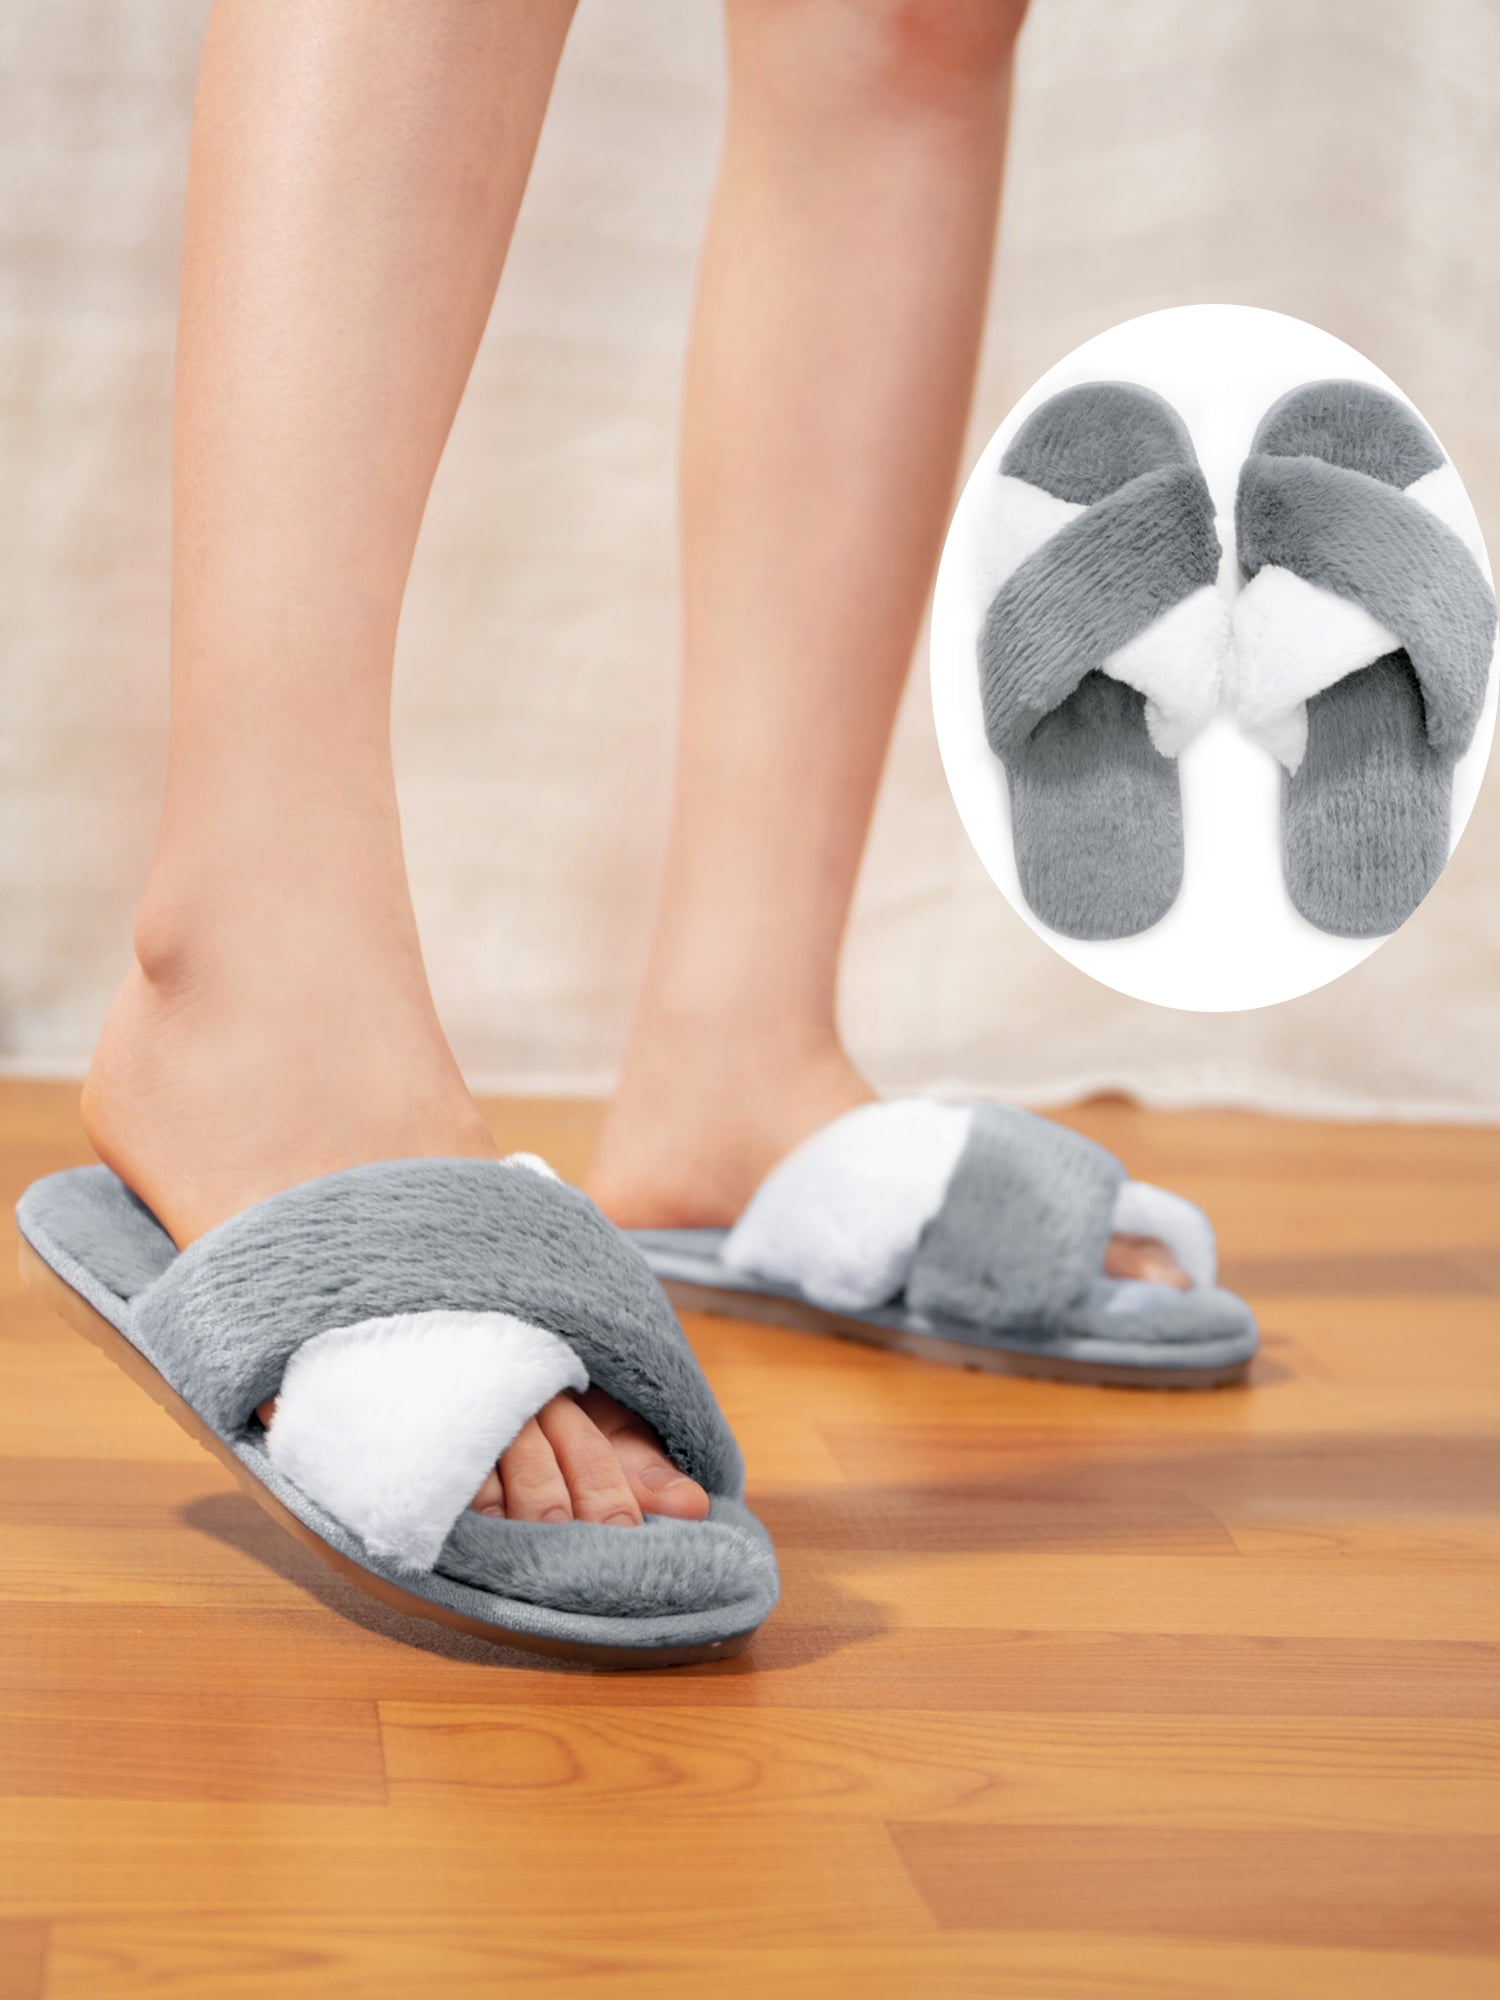 LongBay Womens Soft Indoor Or Outdoor Slippers Open Toe Coral Fleece House Slippers 